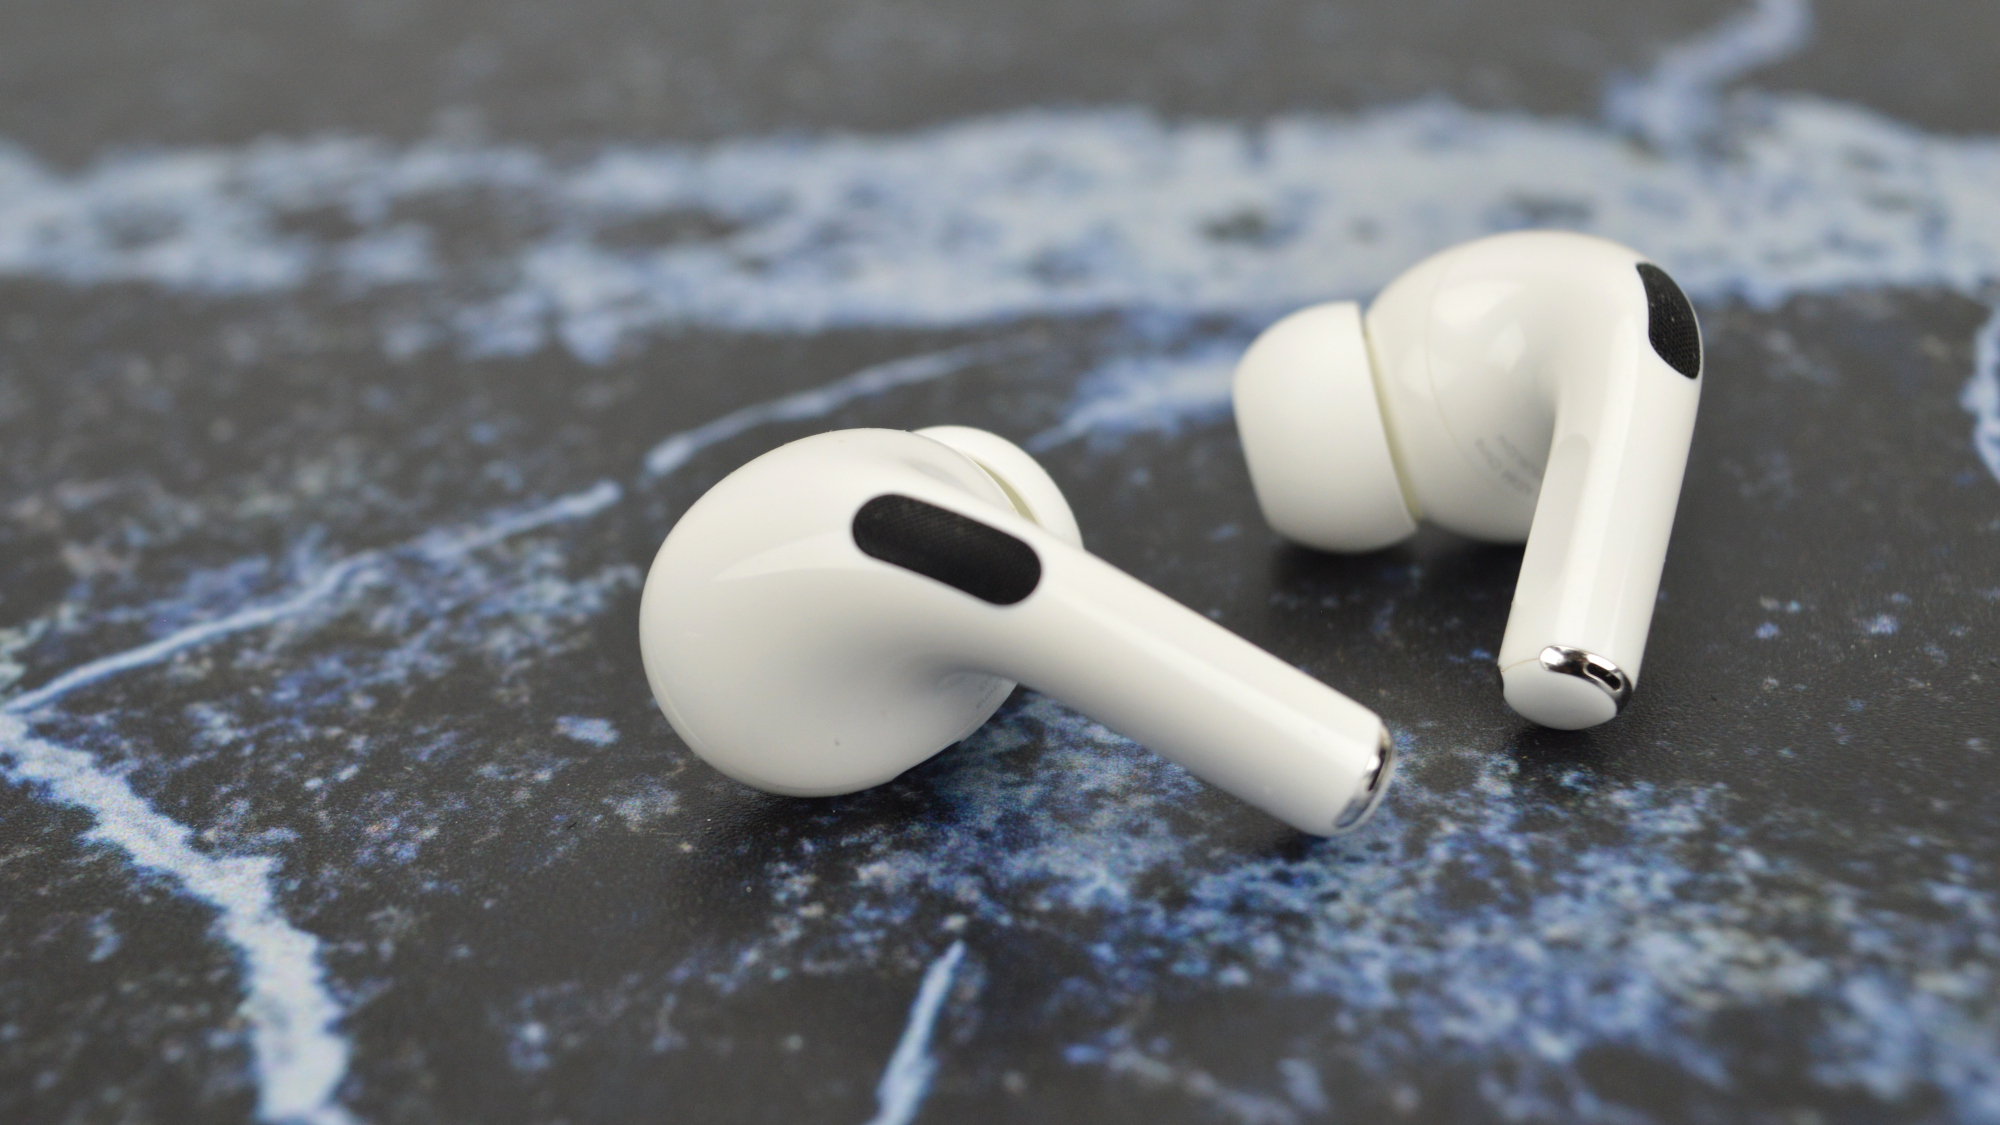 Apple AirPods Pro Buds 2